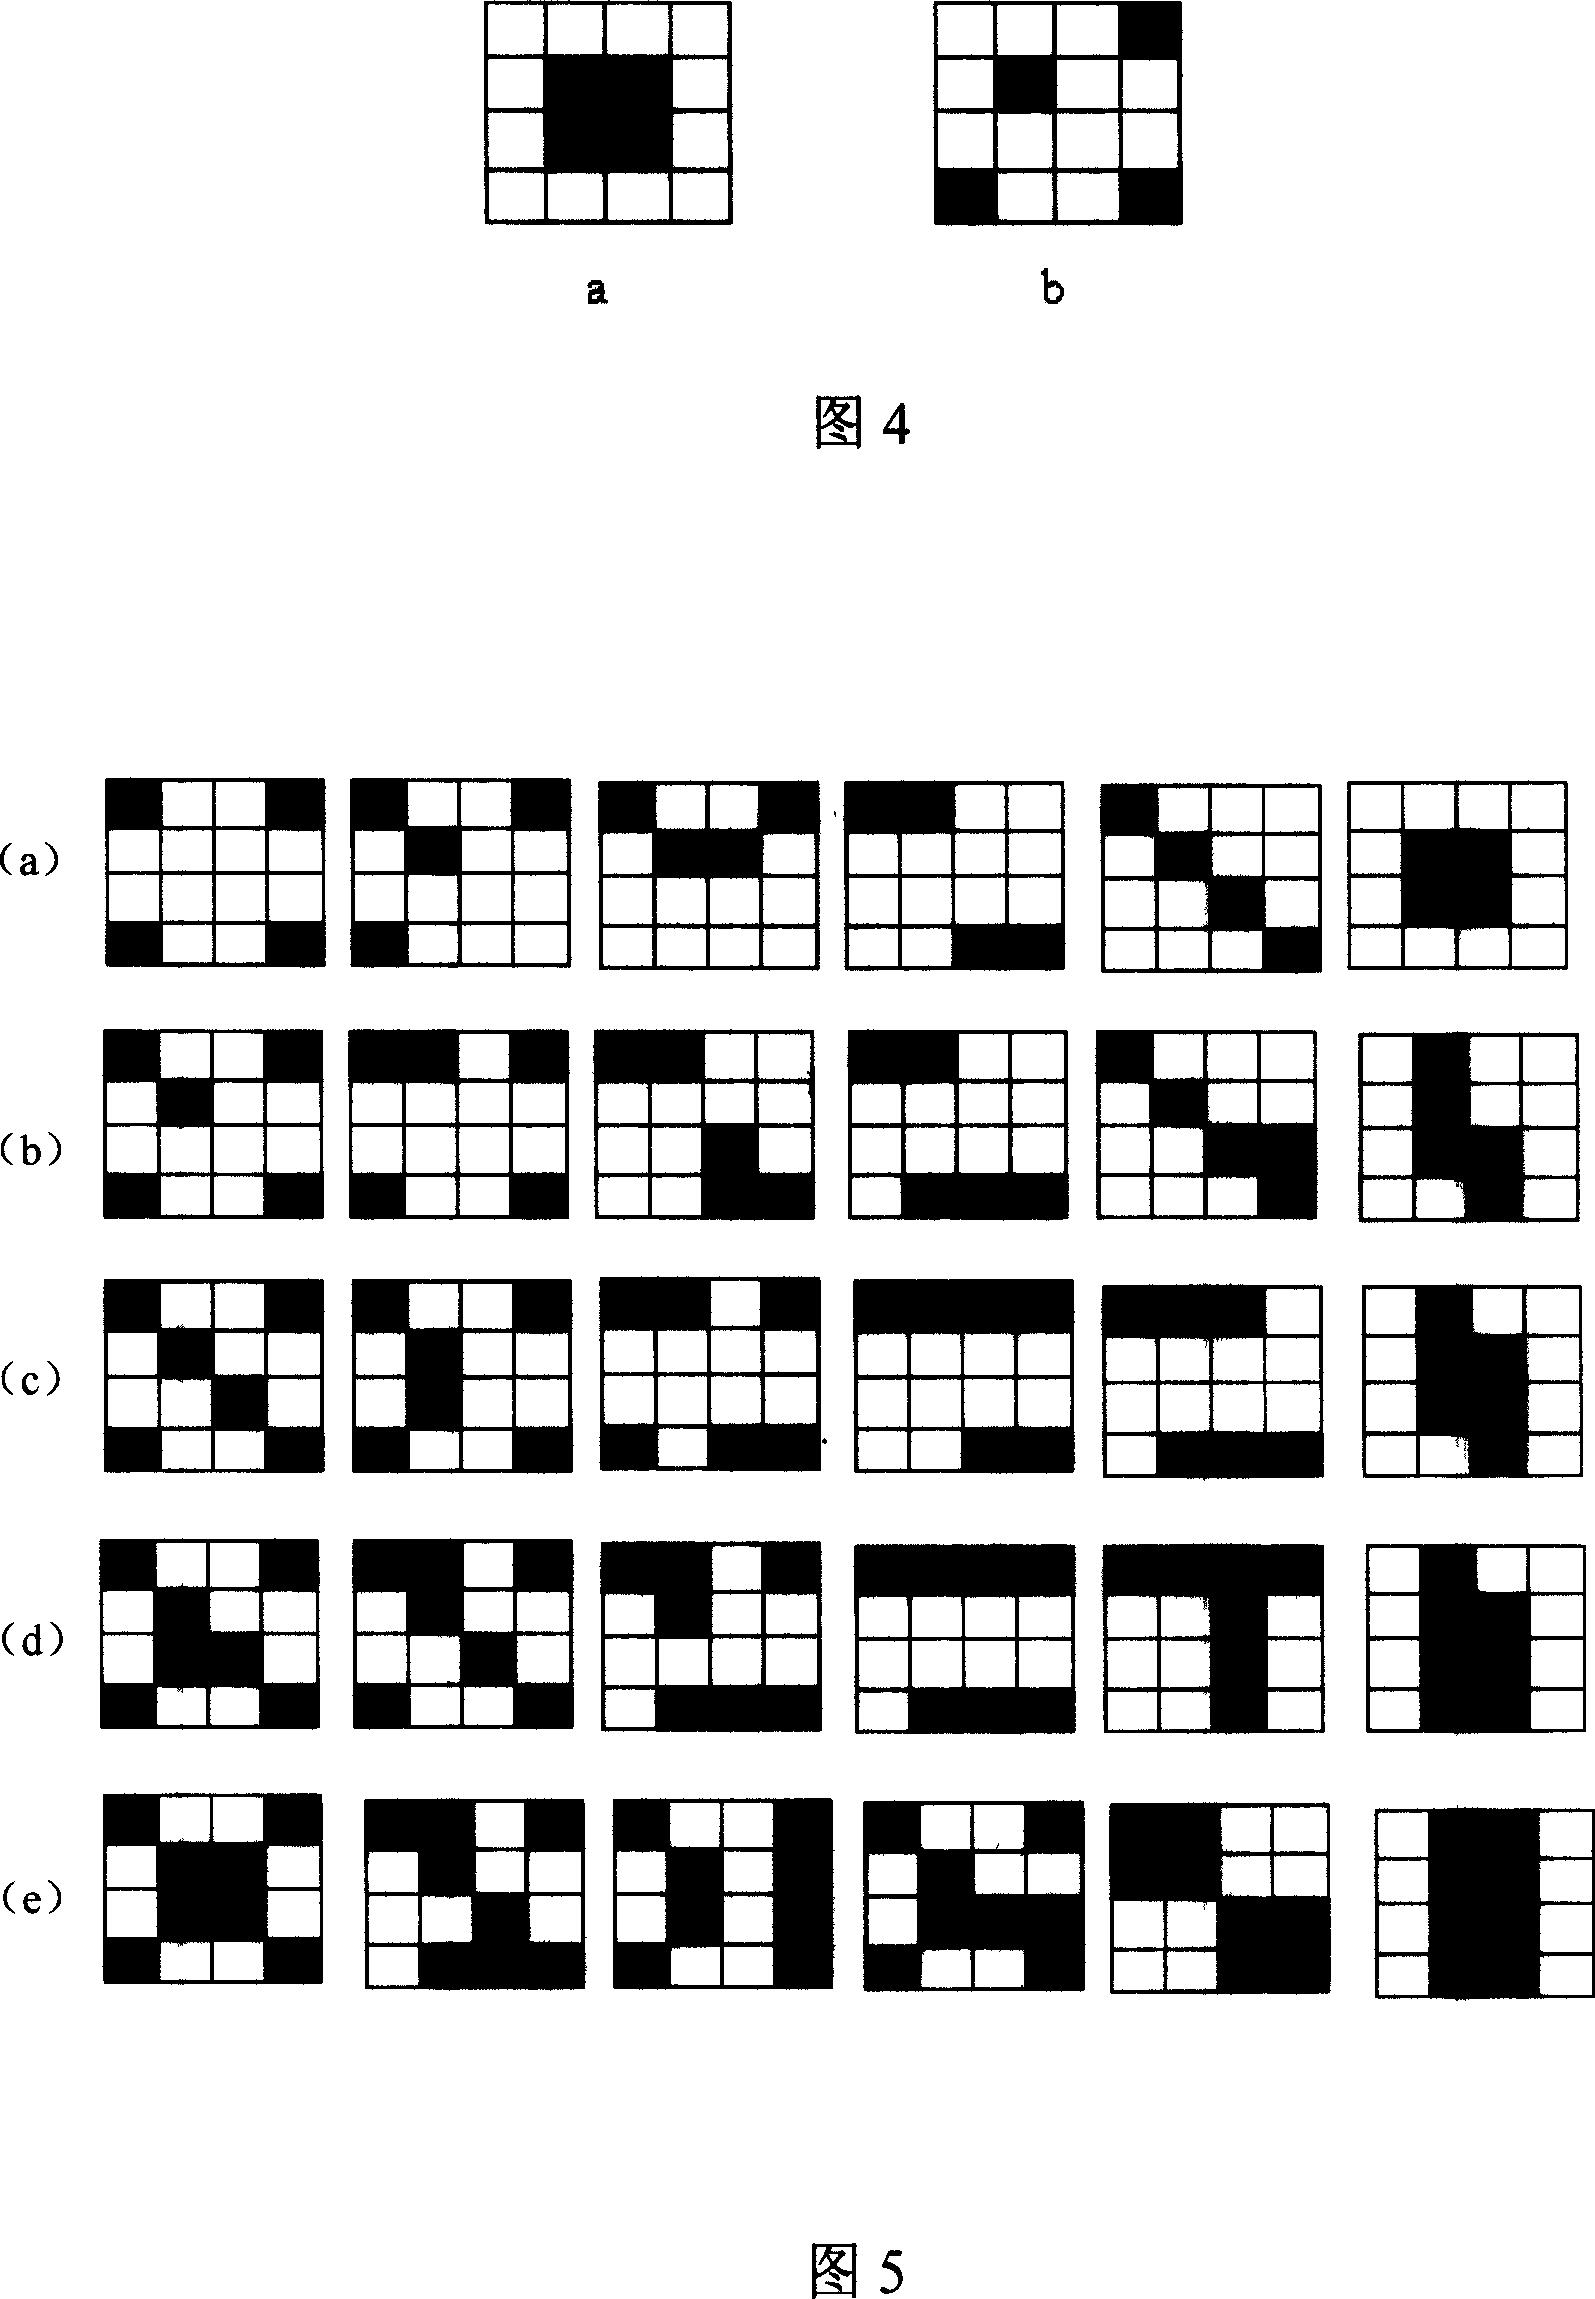 Grey scale image embedded information content analysis method